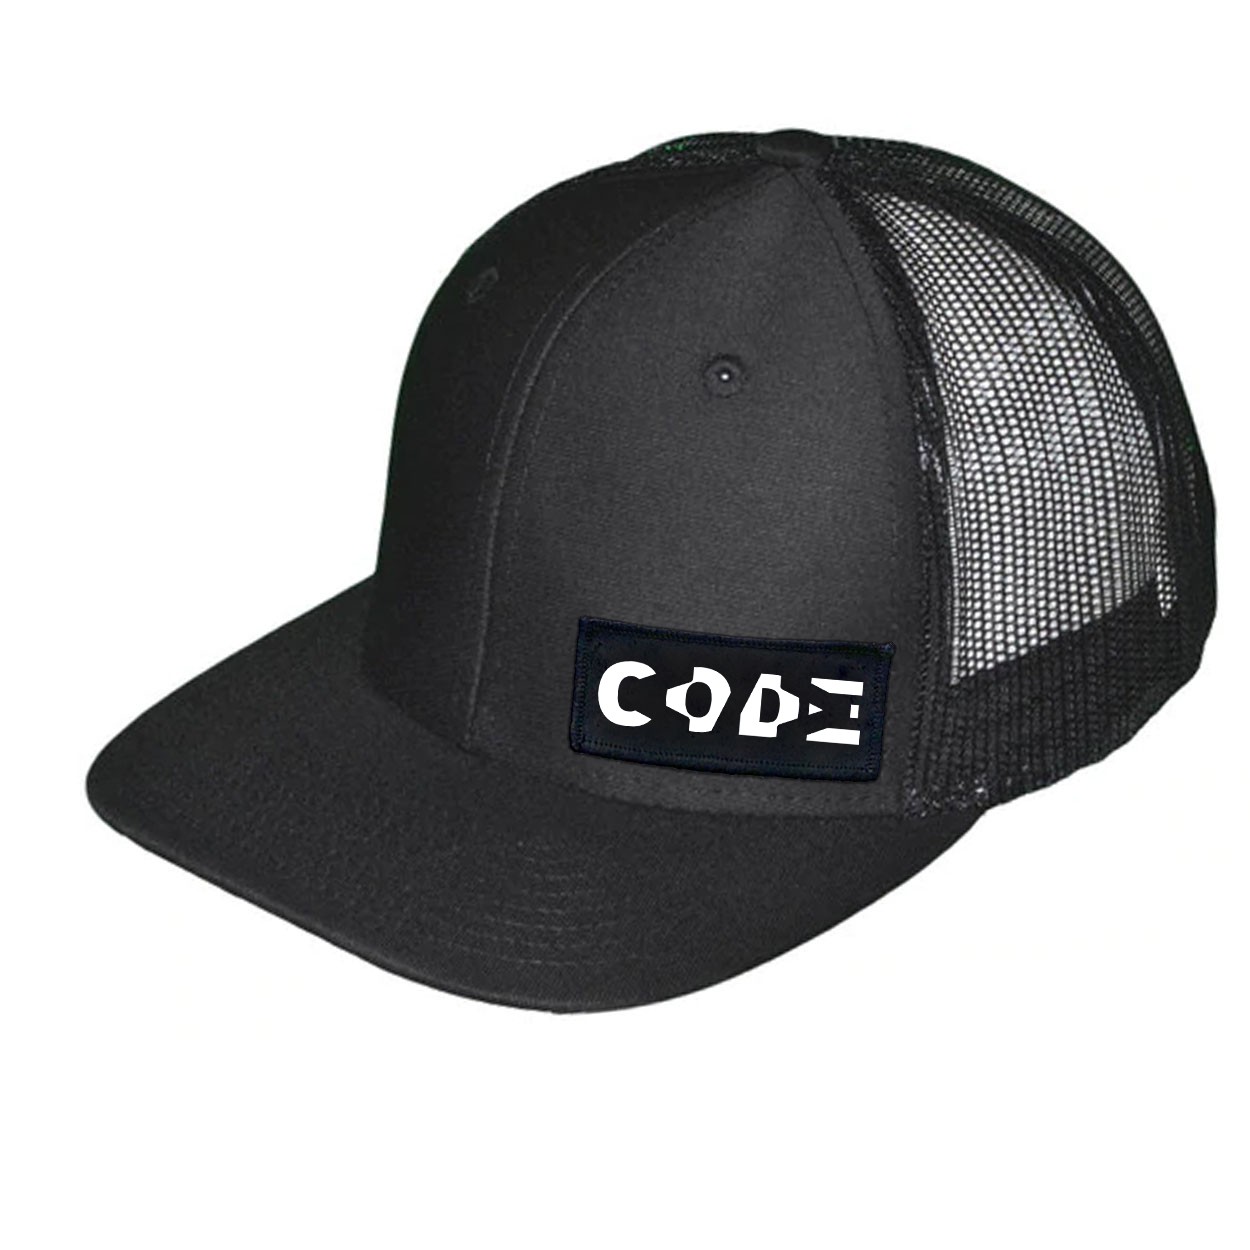 Code Tag Logo Night Out Woven Patch Snapback Trucker Hat Black (White Logo)